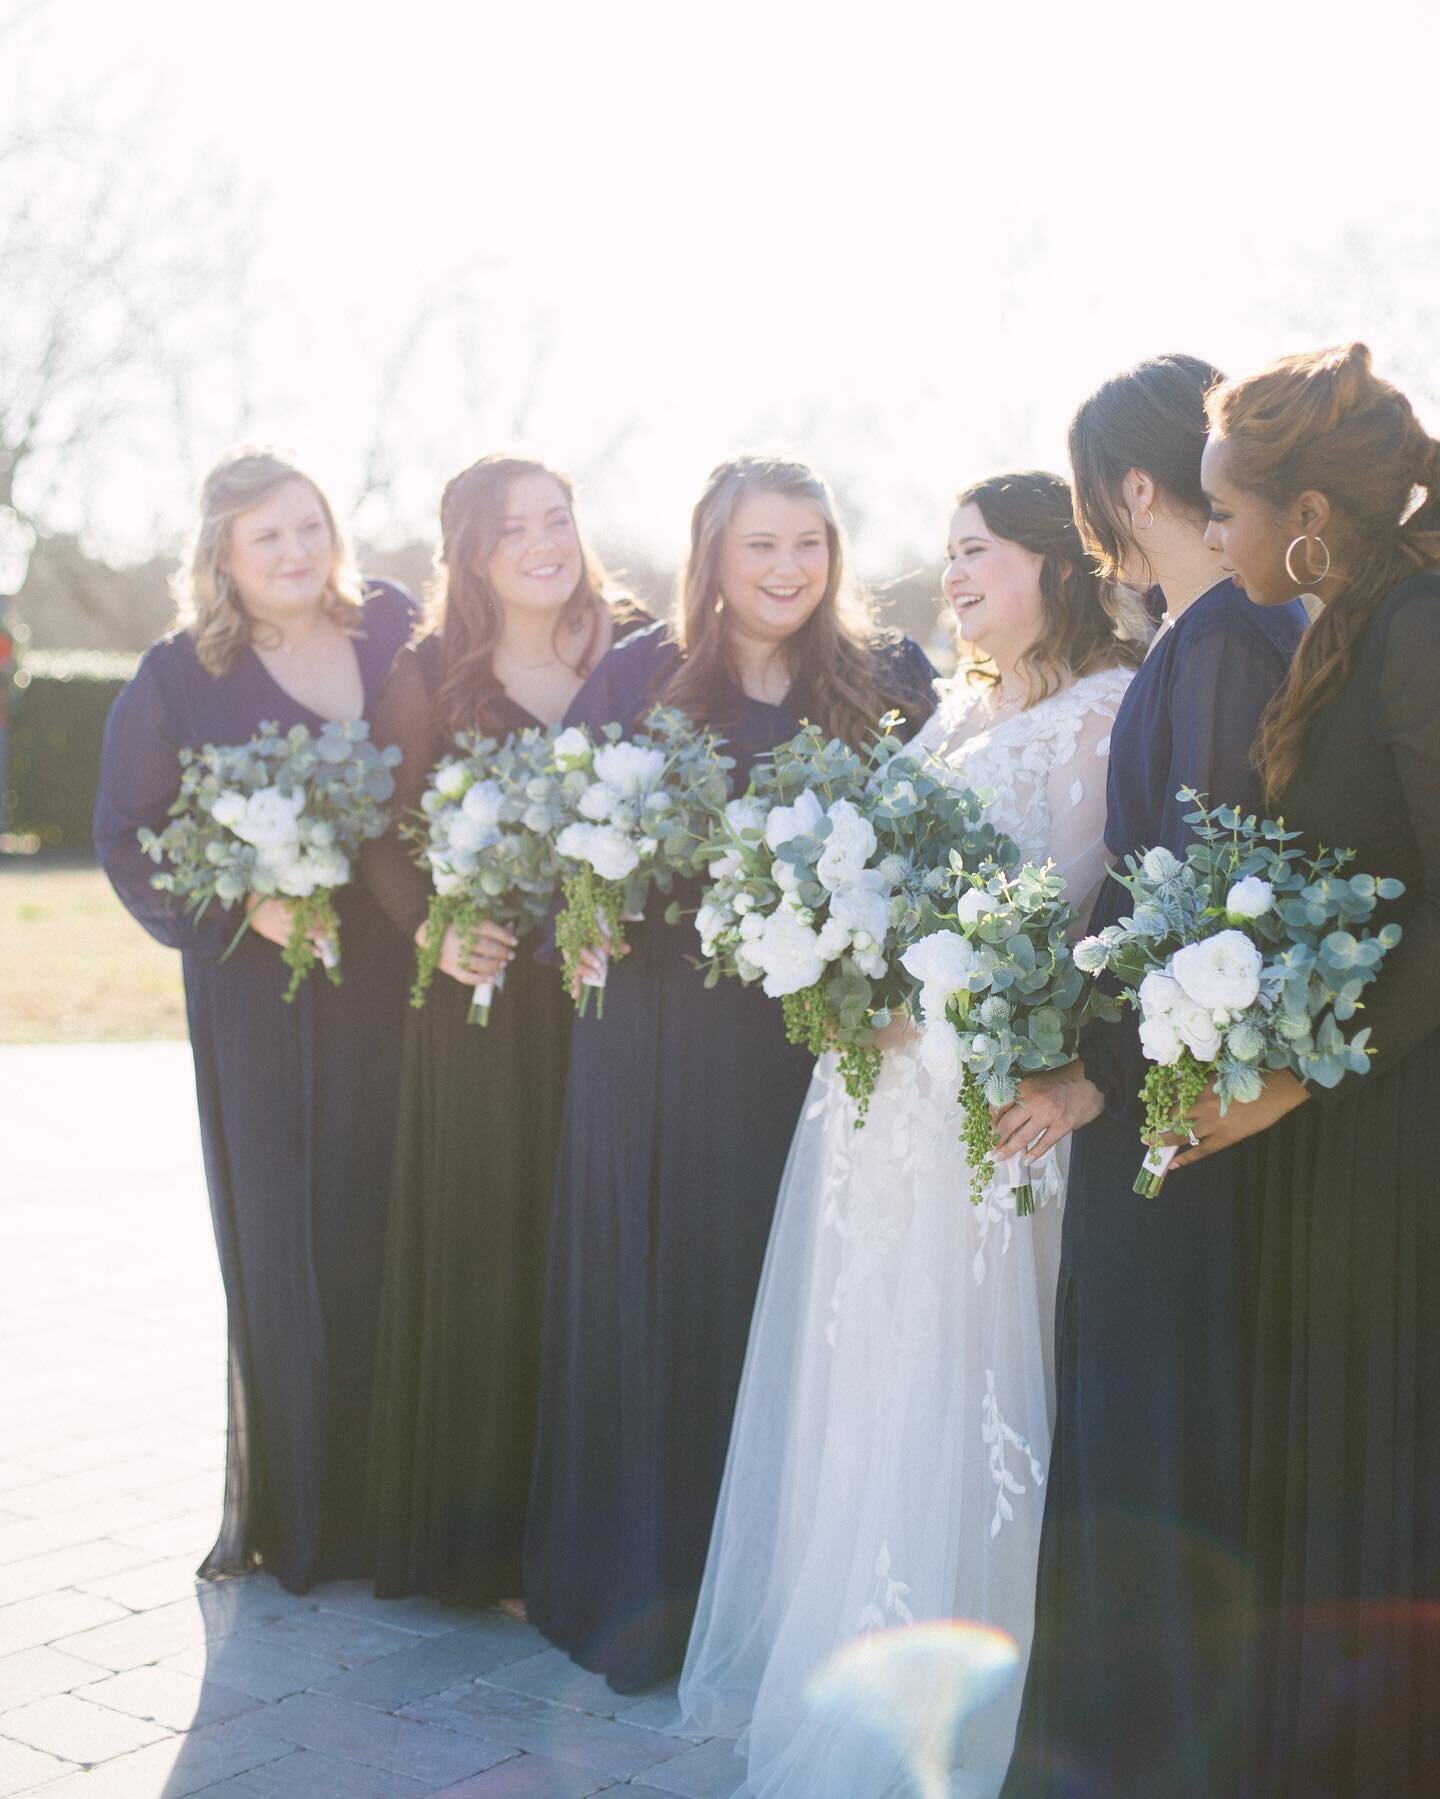 I really love the light in this first one- such beautiful bridesmaid dresses!! Truly a favorite.